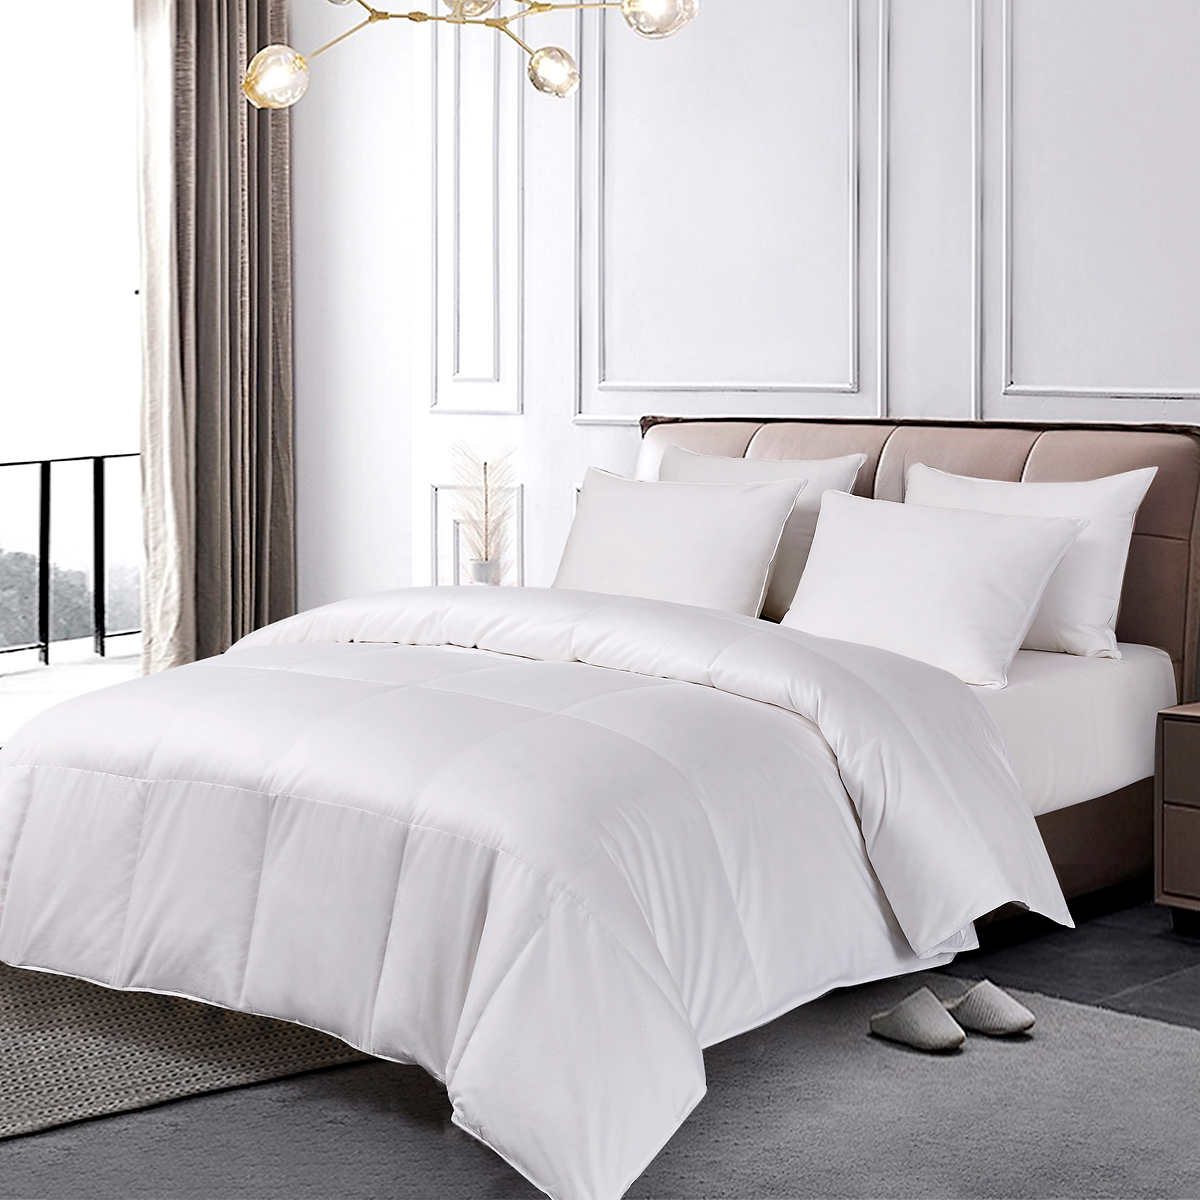 Royal Luxe White Down Comforter Costco, Can You Steam Clean A Down Duvet Cover